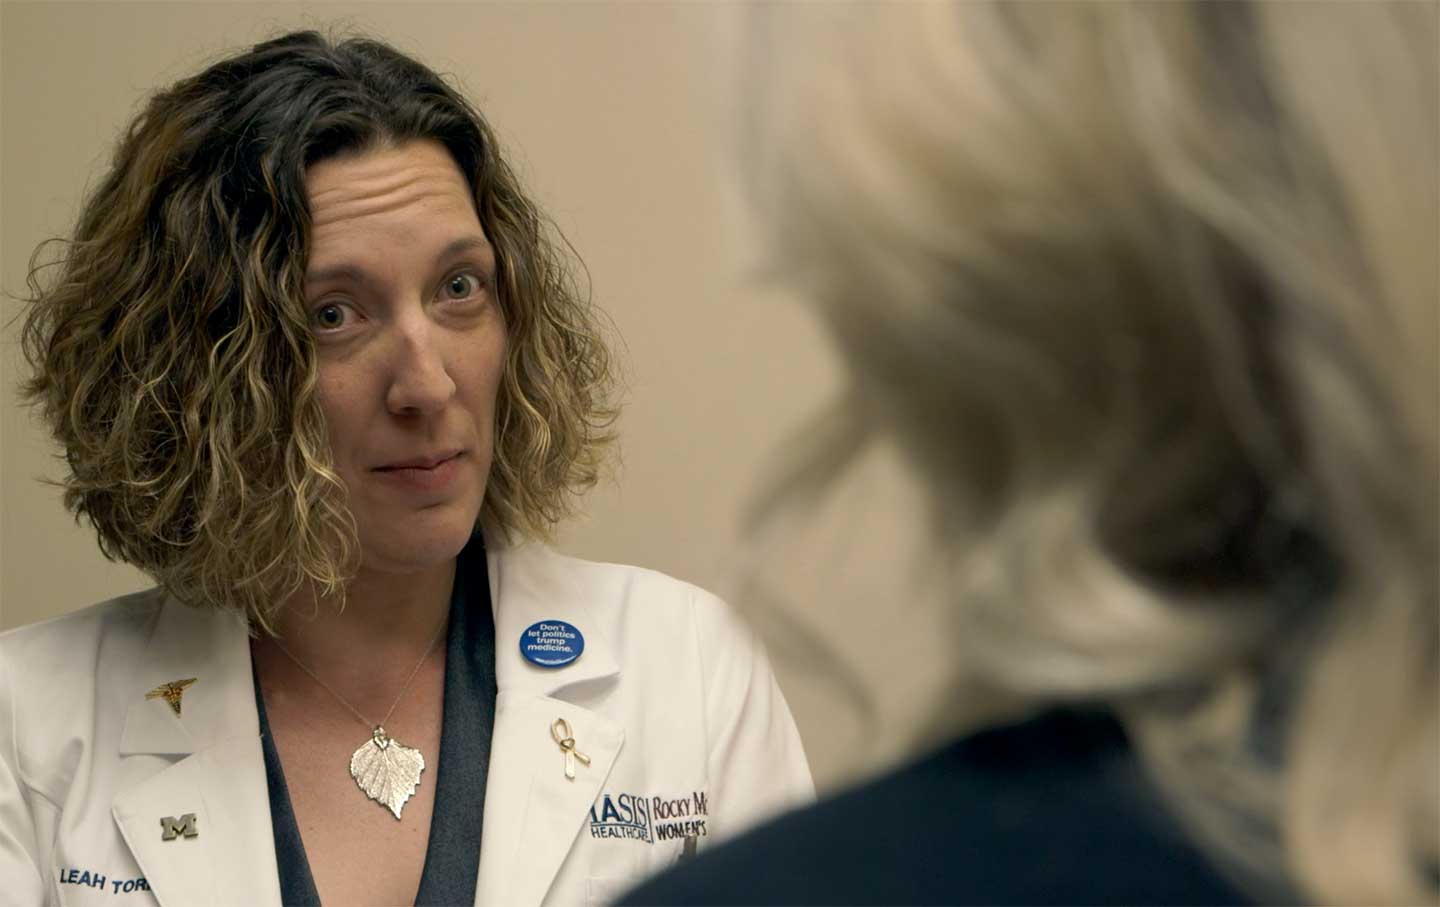 What Is It Like to Be an Abortion Provider in an Anti-Choice State?